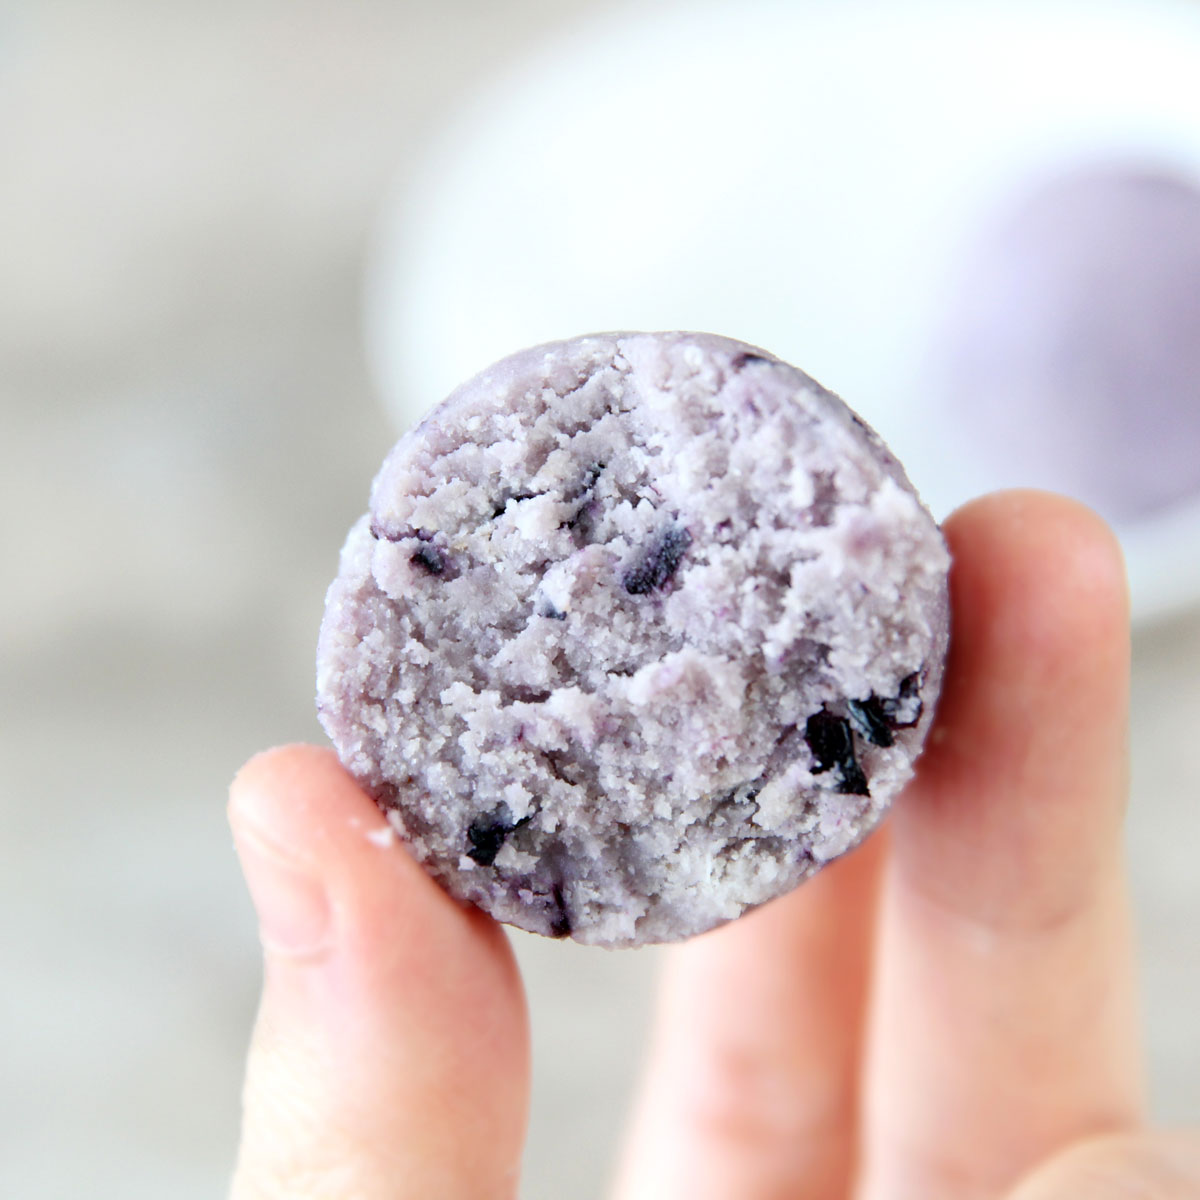 Blueberry Cheesecake Protein Balls Recipe (Healthy Low Carb Energy Bites) - Raspberry Cheesecake Protein Bars